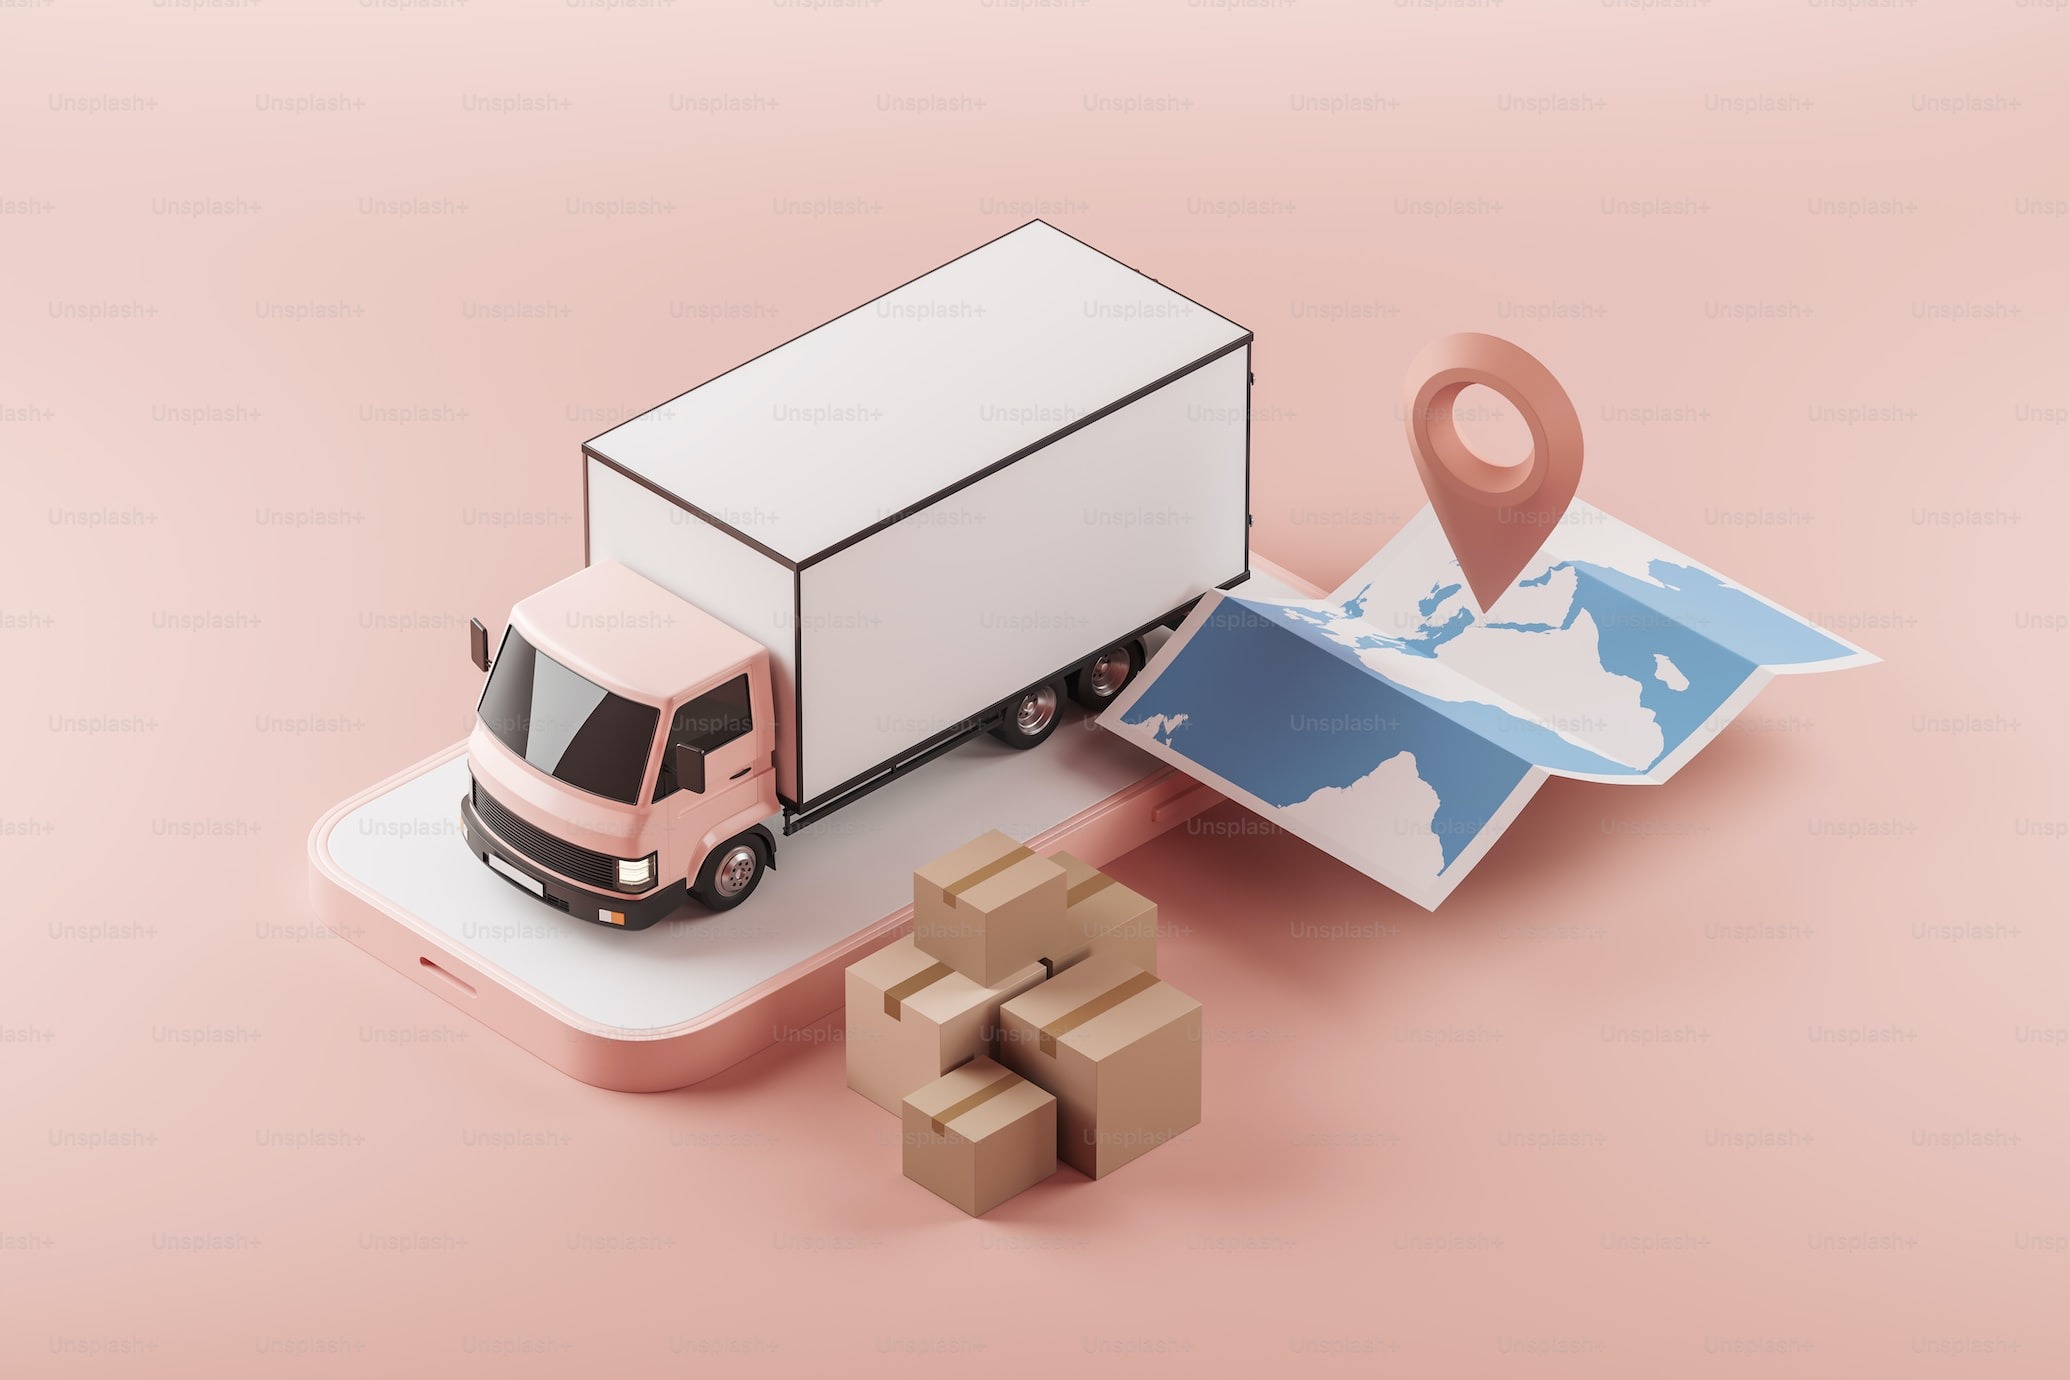 Moving truck parked on an oversized iPhone, next to stacked moving boxes and an oversized map with a pin dropped.